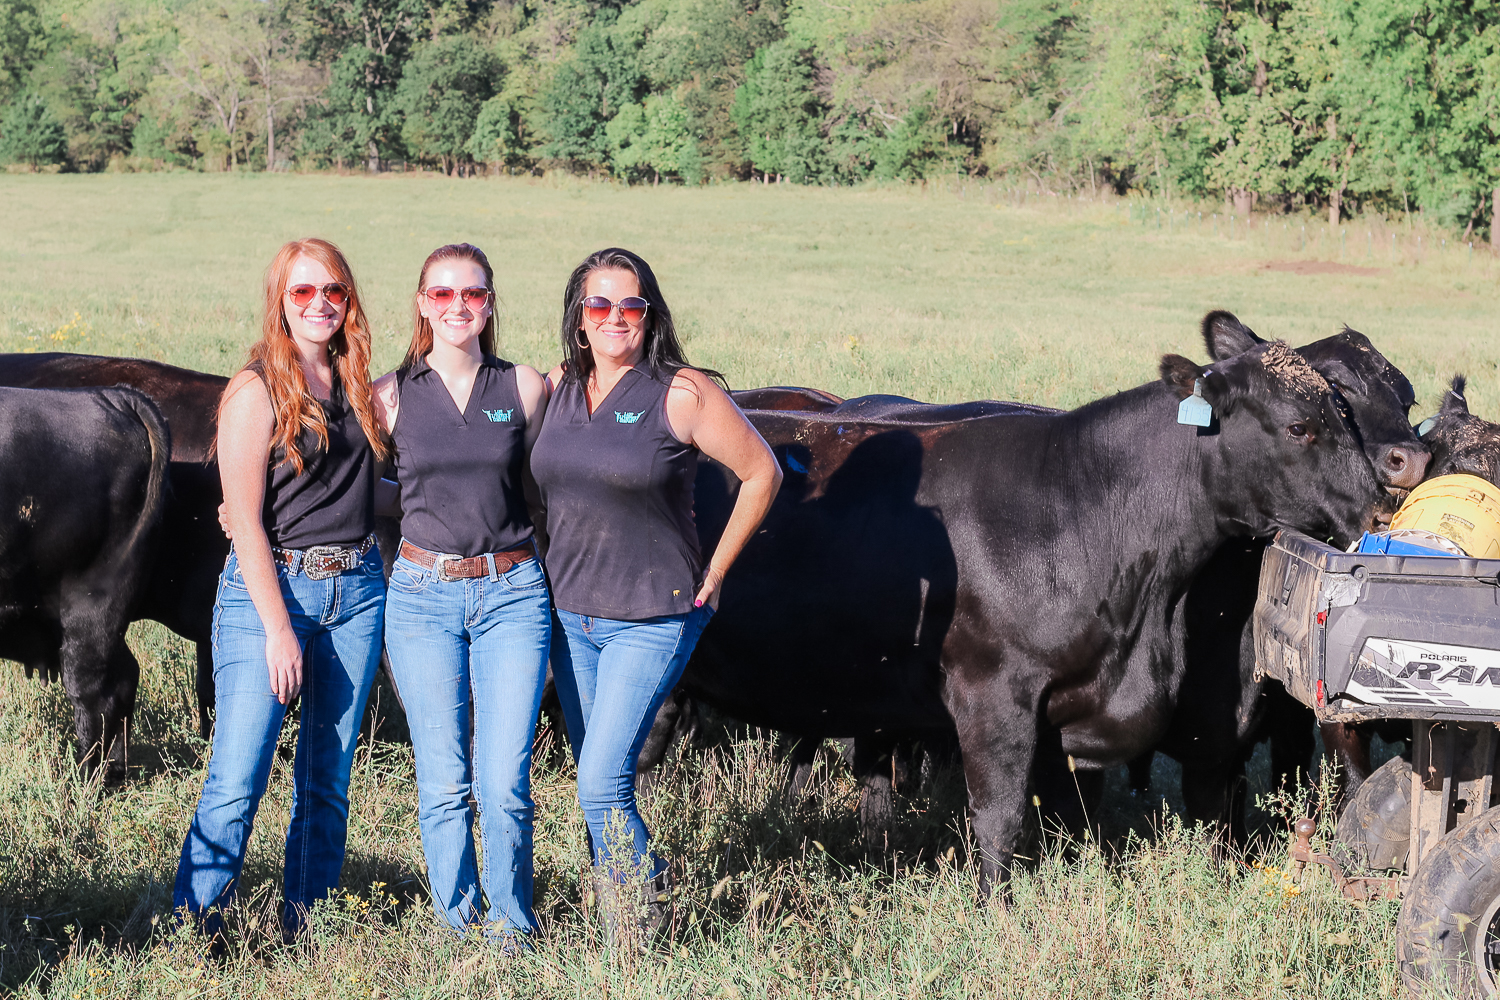 Staci, Macey, and Emma Hurst, owners and operators of Lady Livestock, an angus beef cattle farm in Jefferson City, Missouri